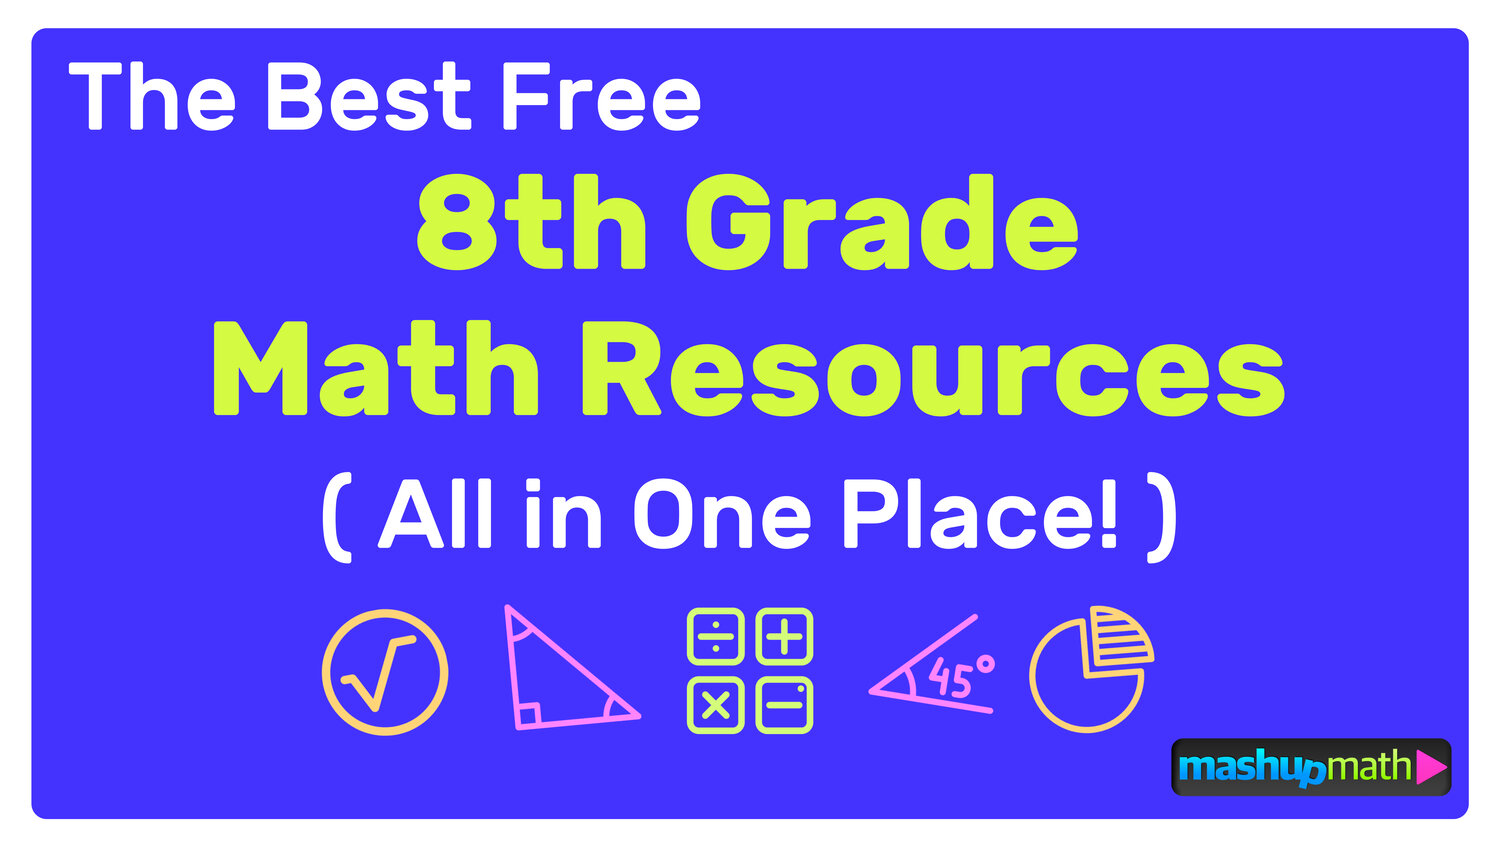 the-best-free-8th-grade-math-resources-complete-list-mashup-math